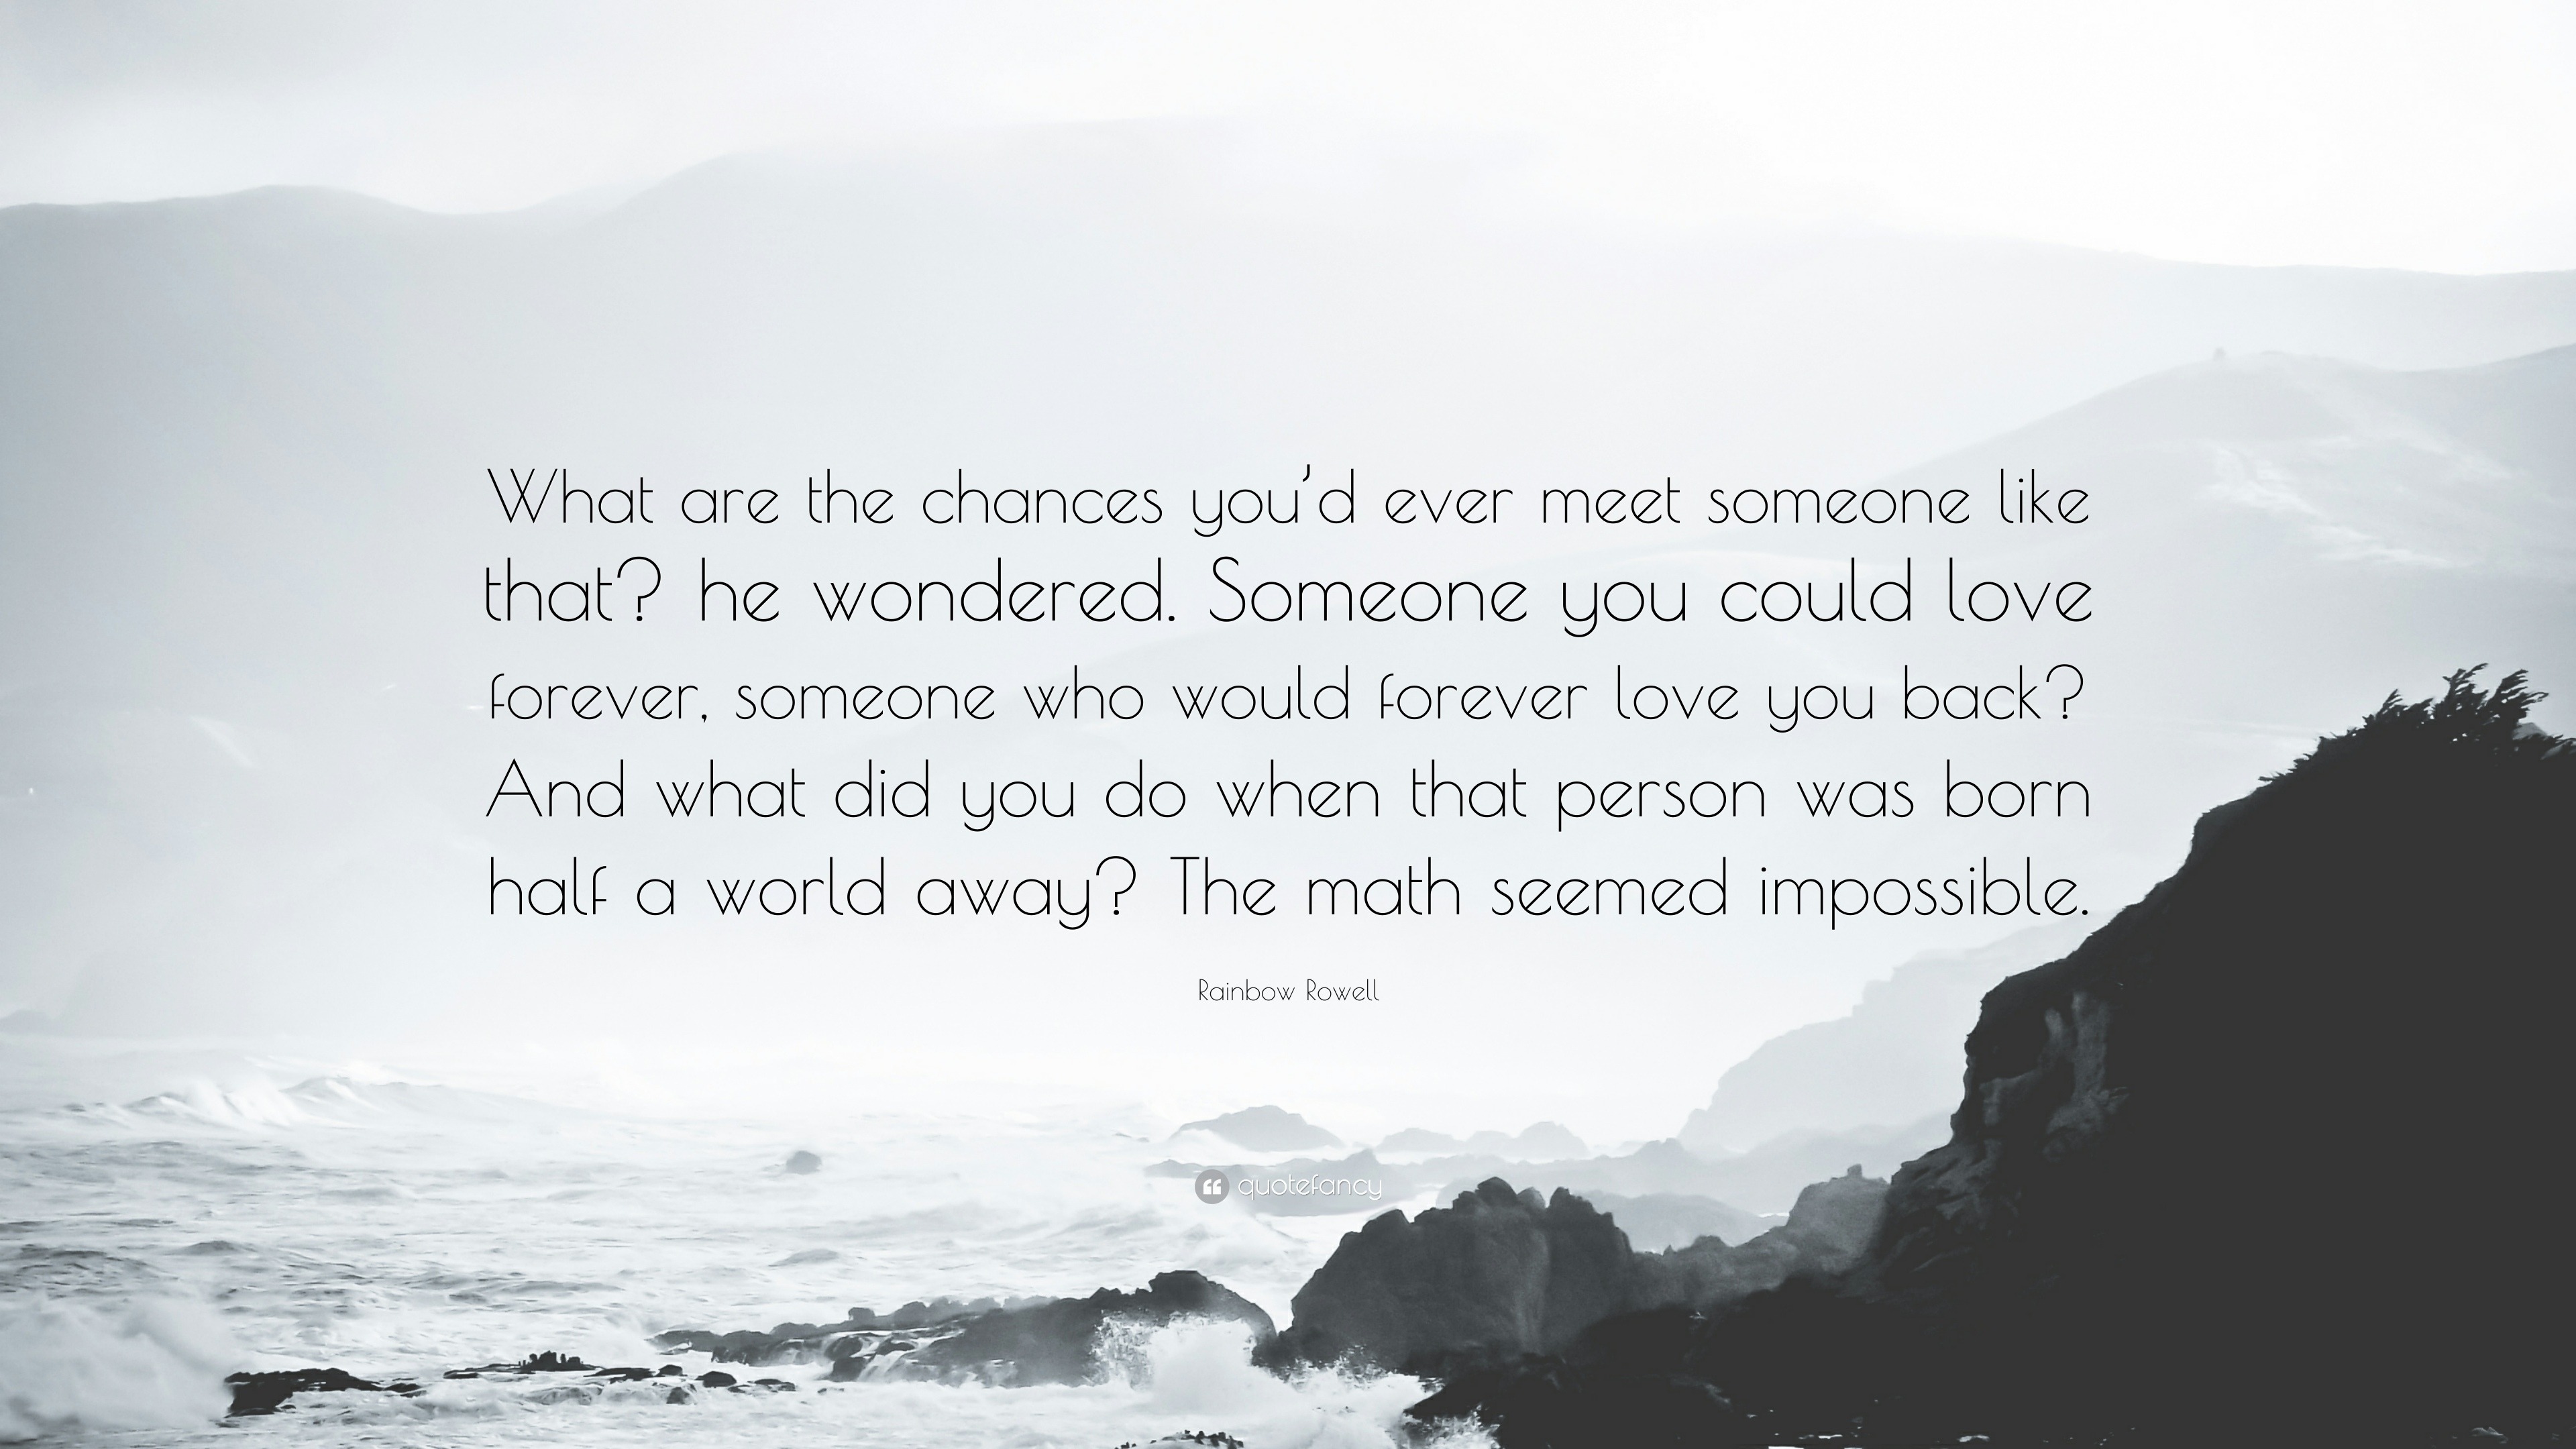 Soulmate Quotes “What are the chances you d ever meet someone like that